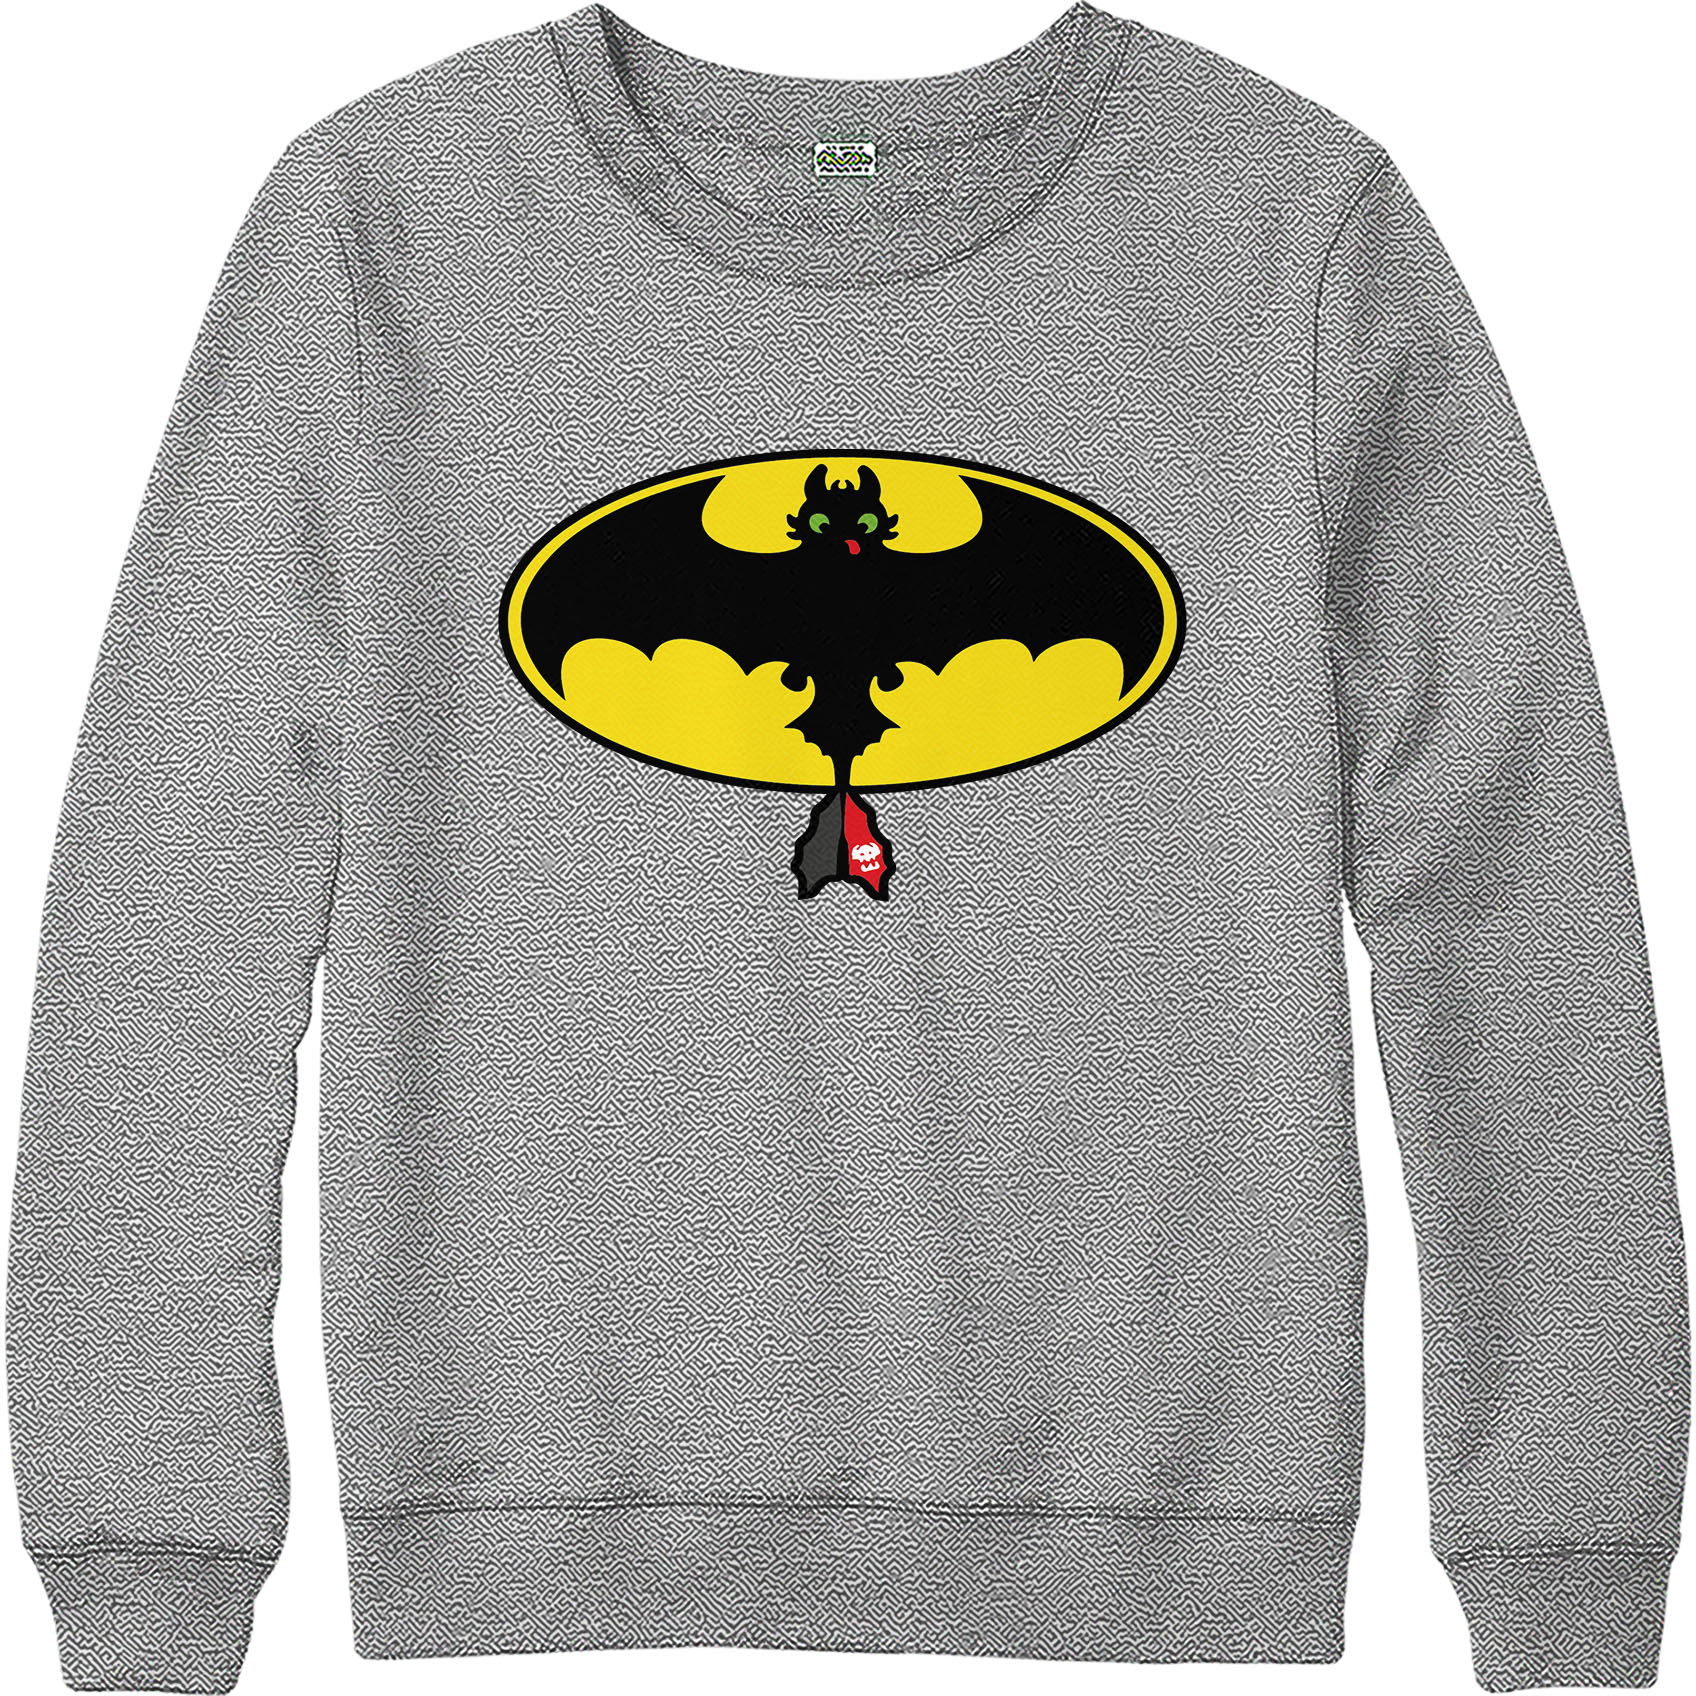 How to train your dragon Jumper, Batman Toothless Spoof Top | eBay